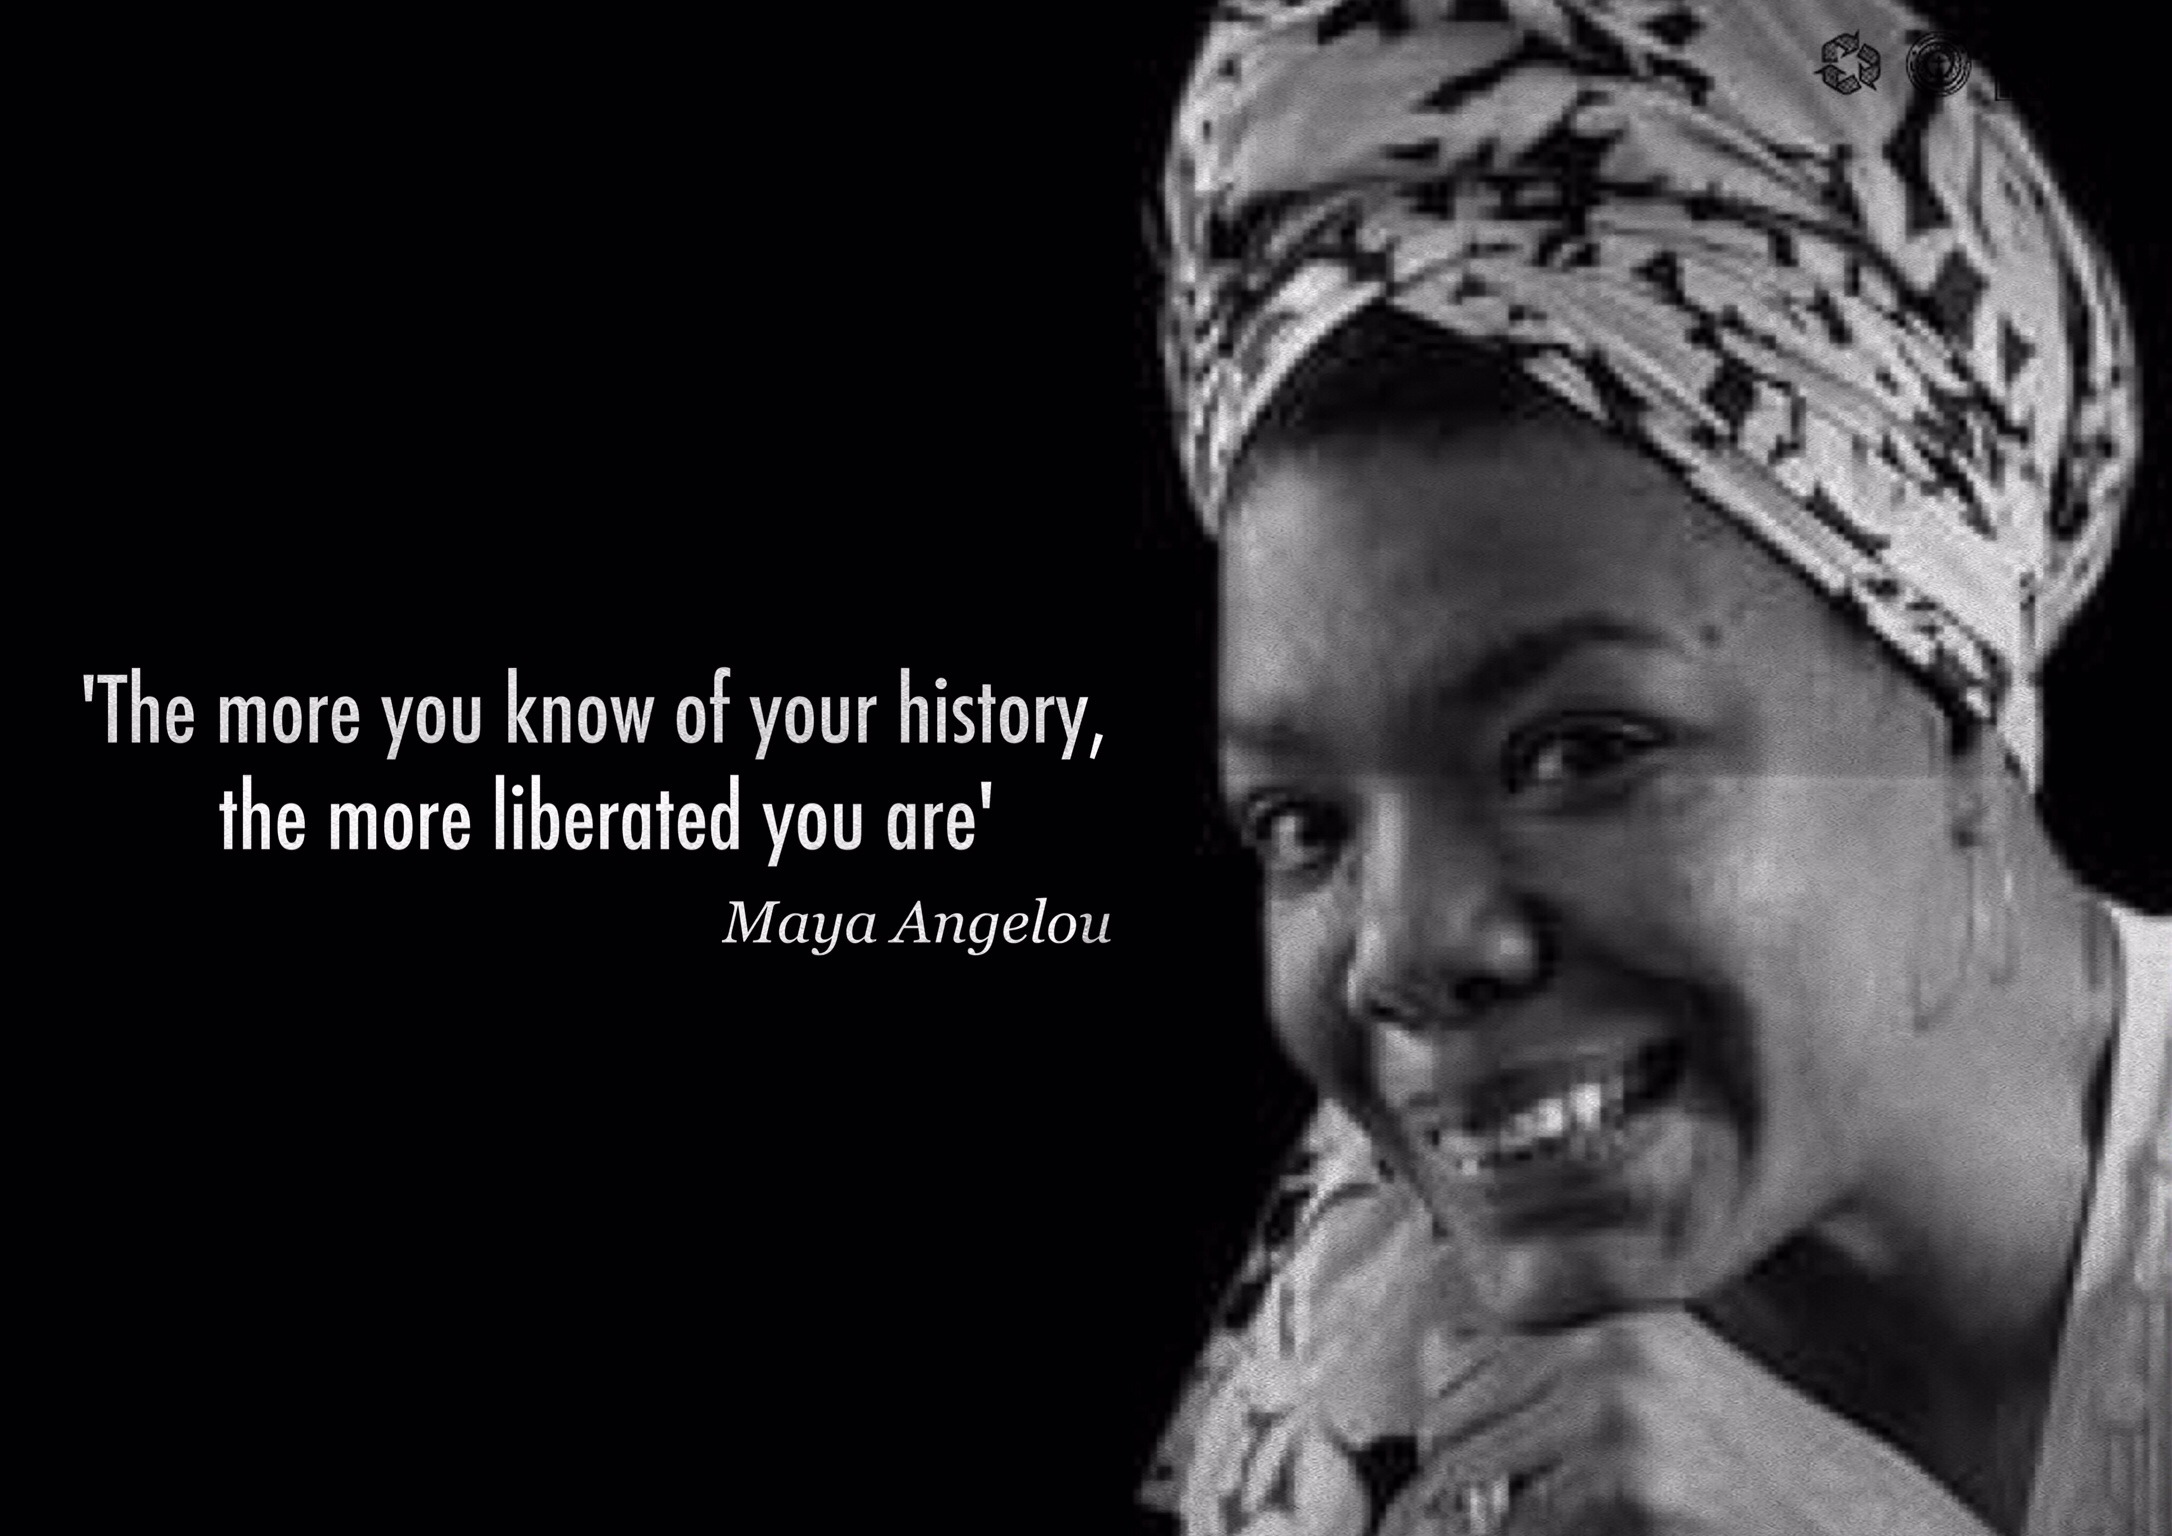 The more you know of your history, the more liberated you are. Maya Angelou